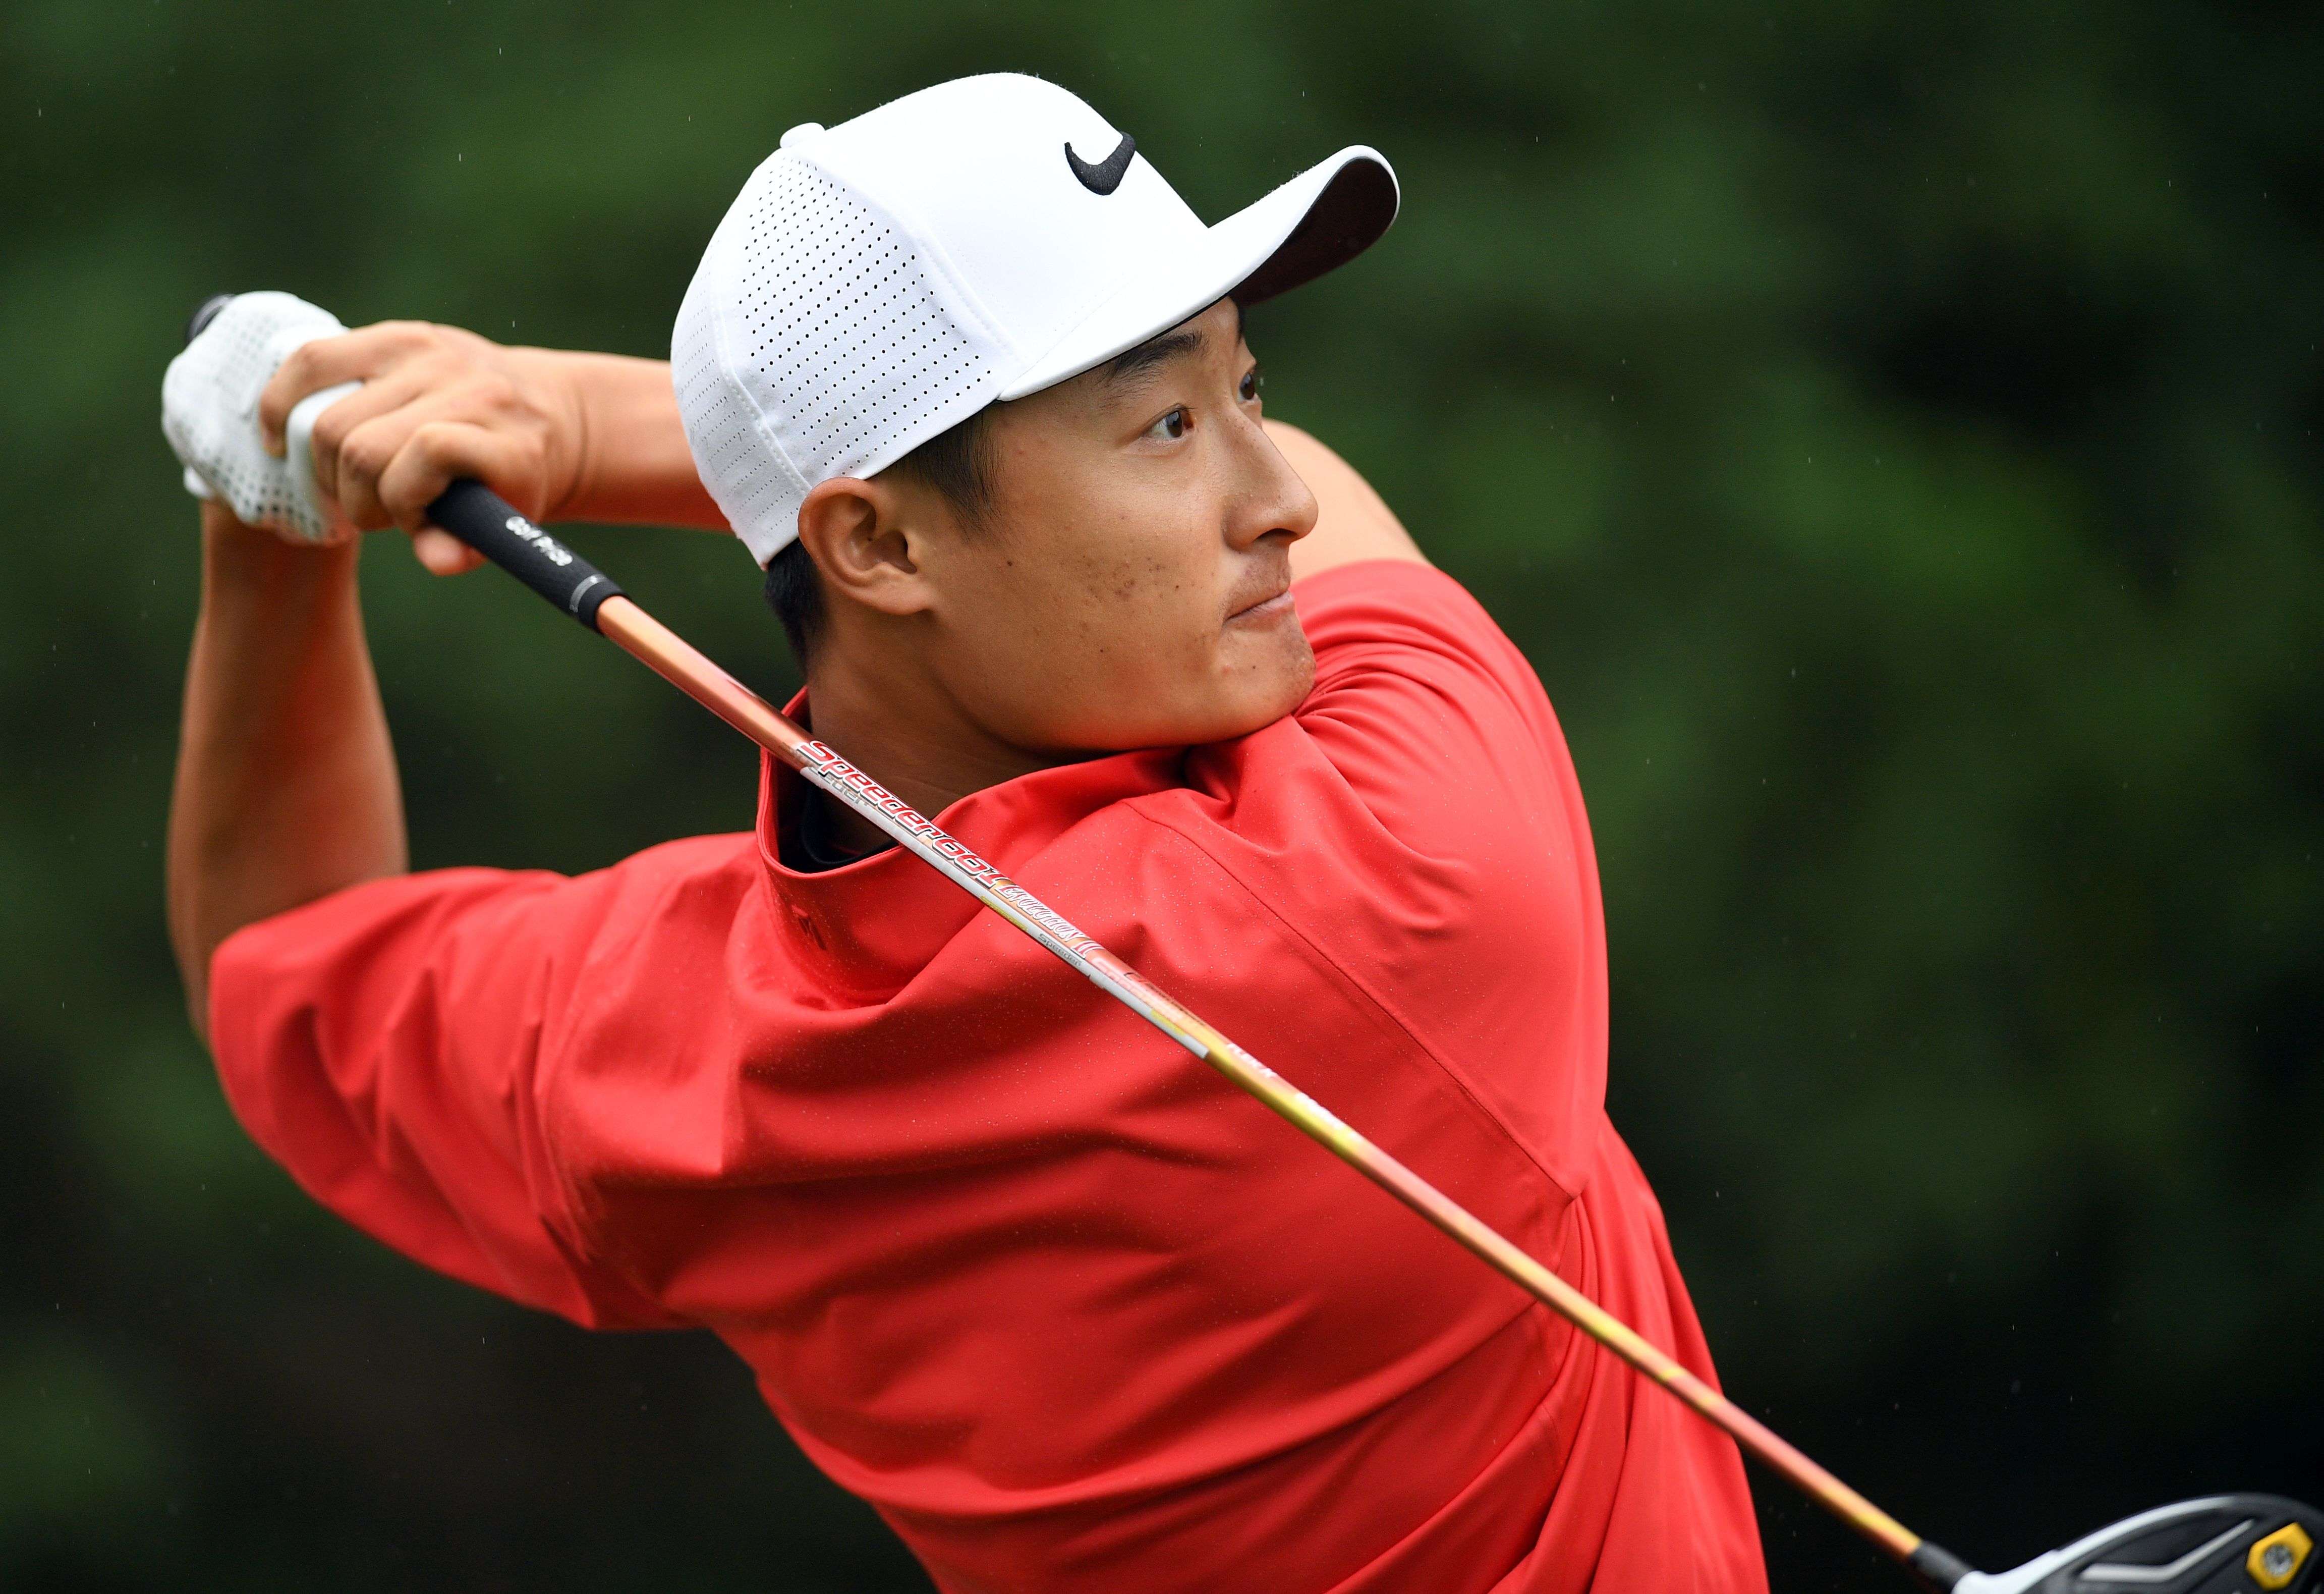 China’s Li Haotong is aiming high after a stellar season on the European Tour. Photo: AFP